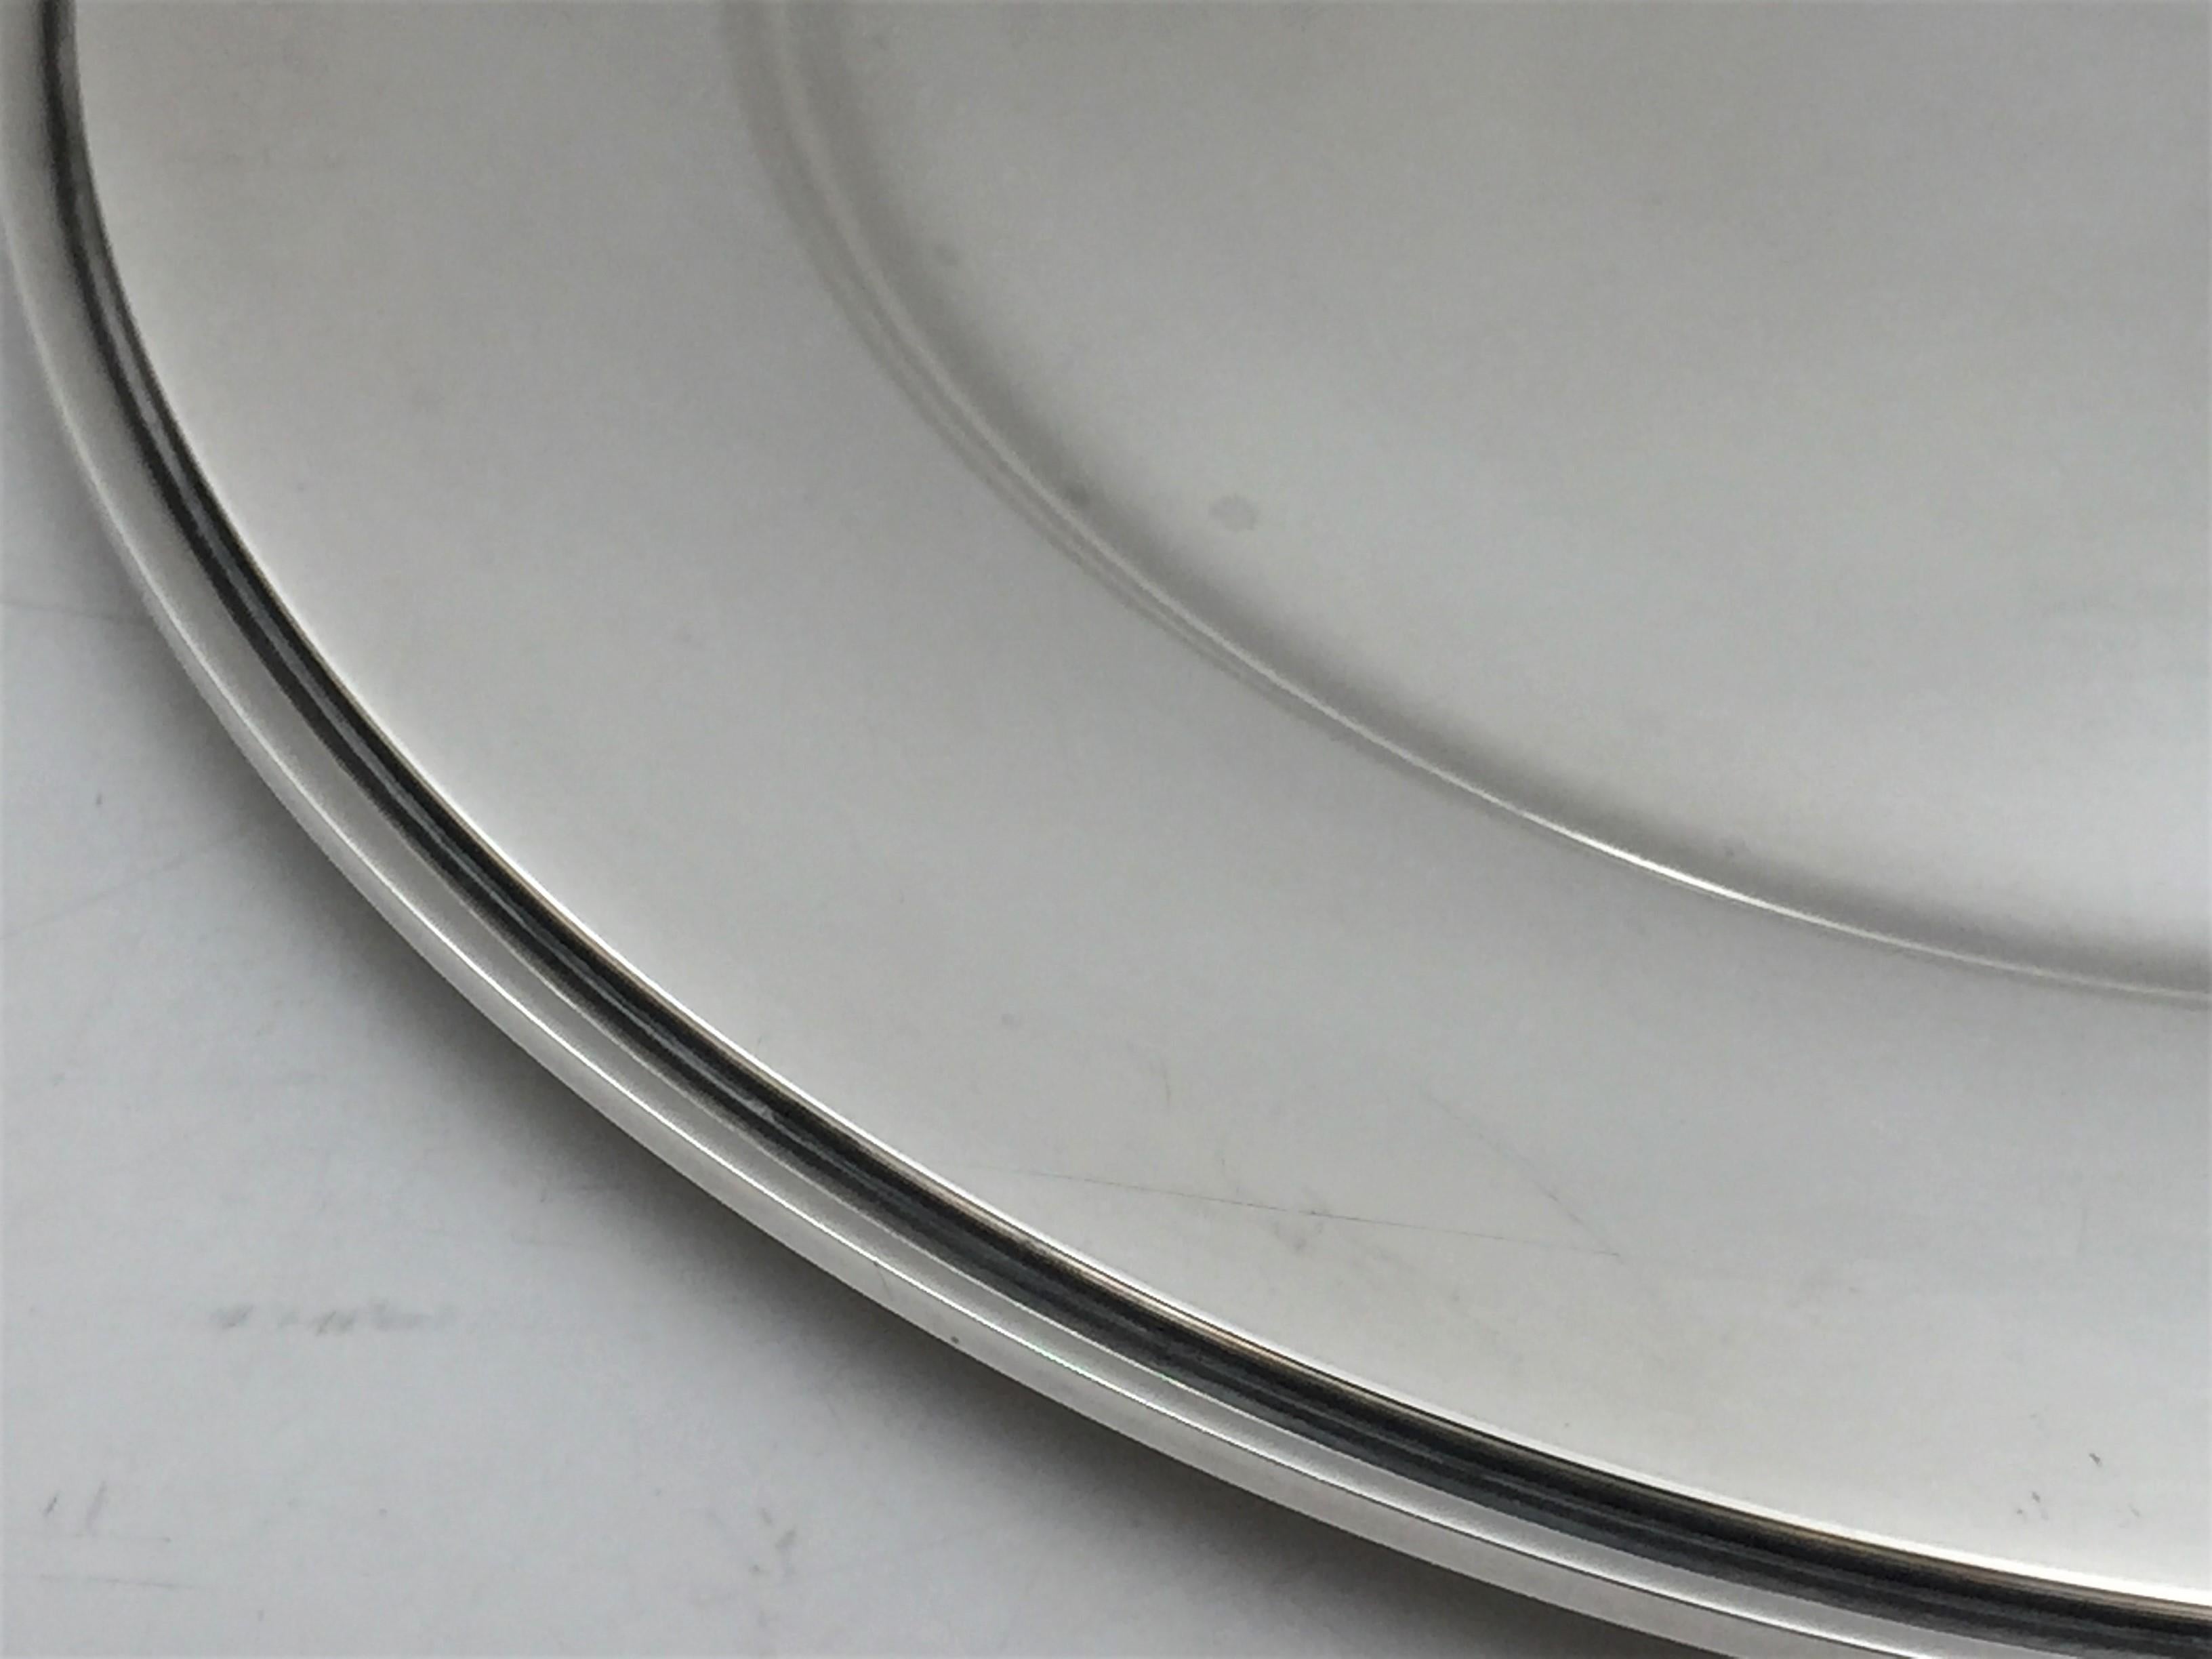 Mid-Century Modern G. Jensen Sterling Silver Charger/ Plate in Pyramid Pattern #600y from 1910s/20s For Sale